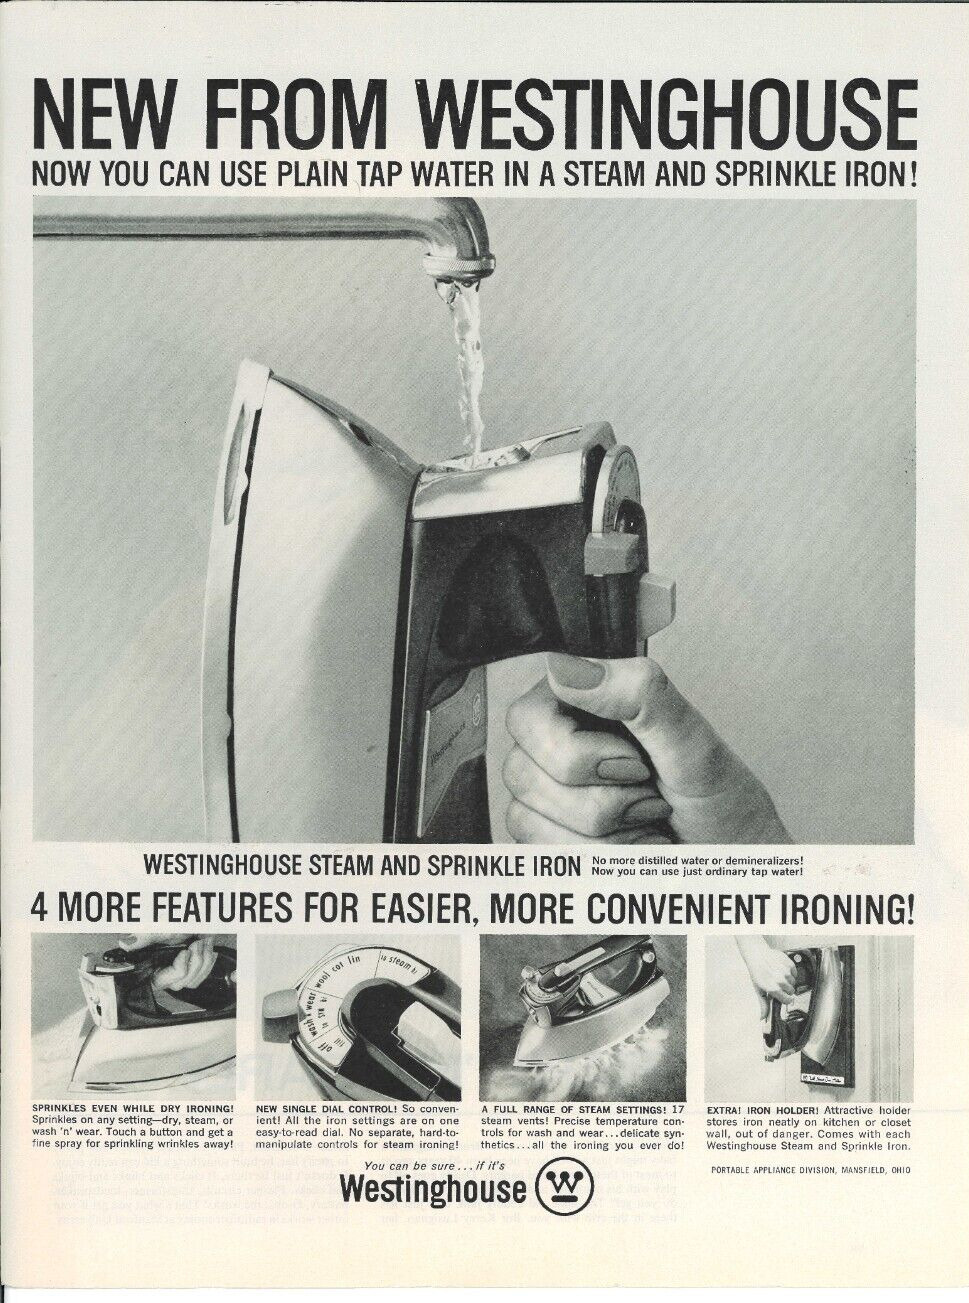 1962 WESTINGHOUSE Steam Sprinkle Iron Tap Water Appliance Vintage Print Ad